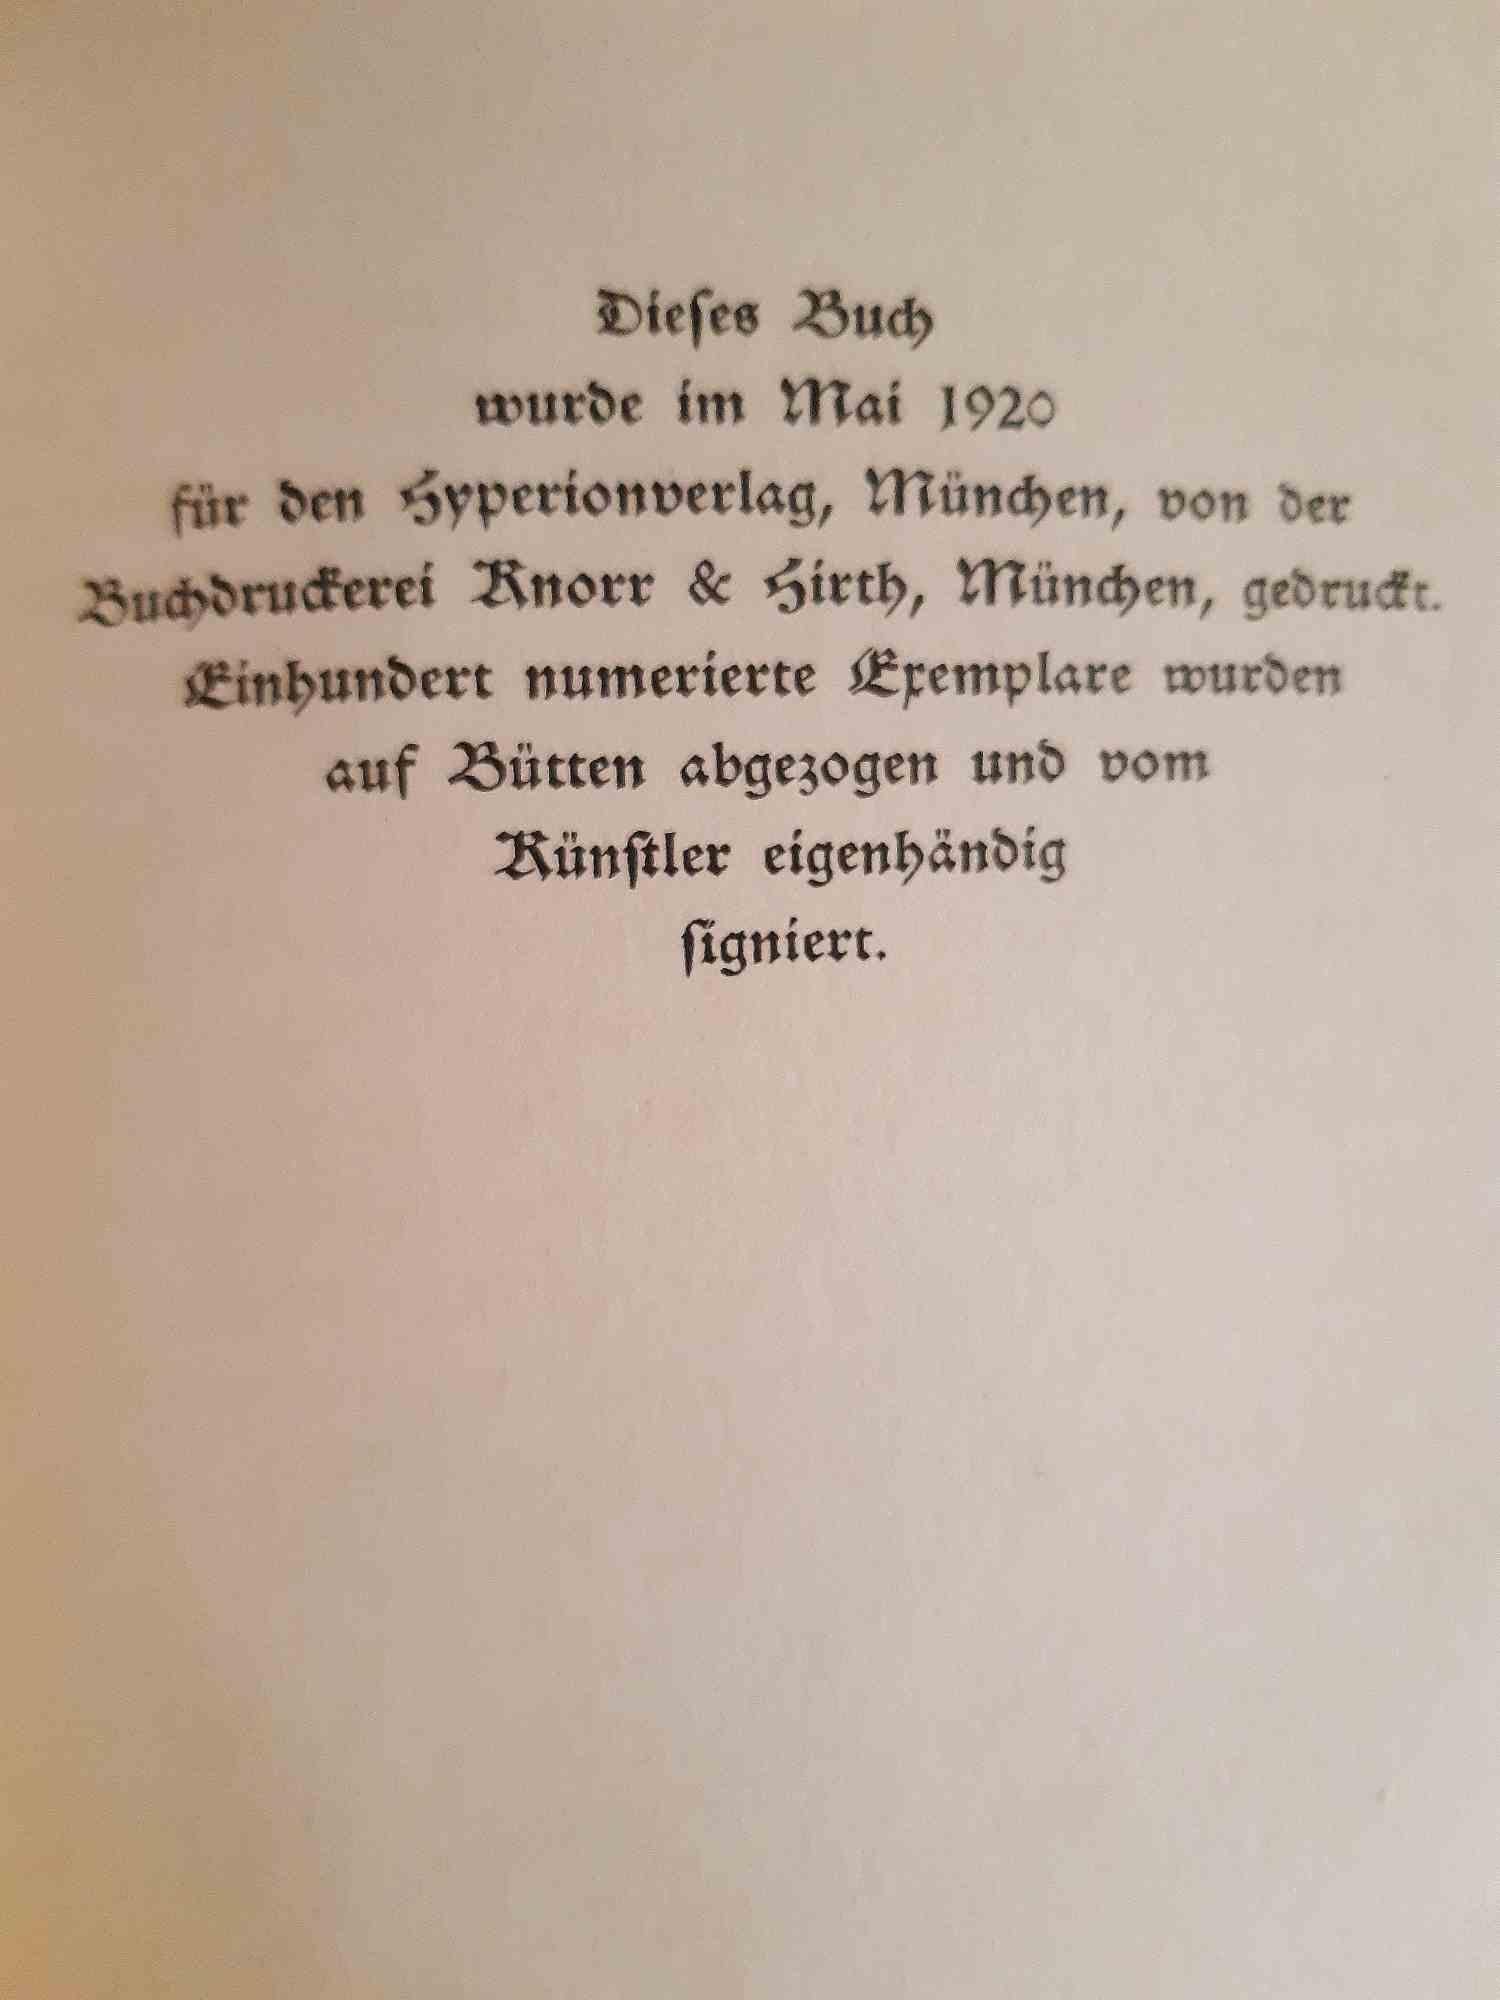 Münchausen -  Rare Book Illustrated by Karl Rössing - 1920 For Sale 2